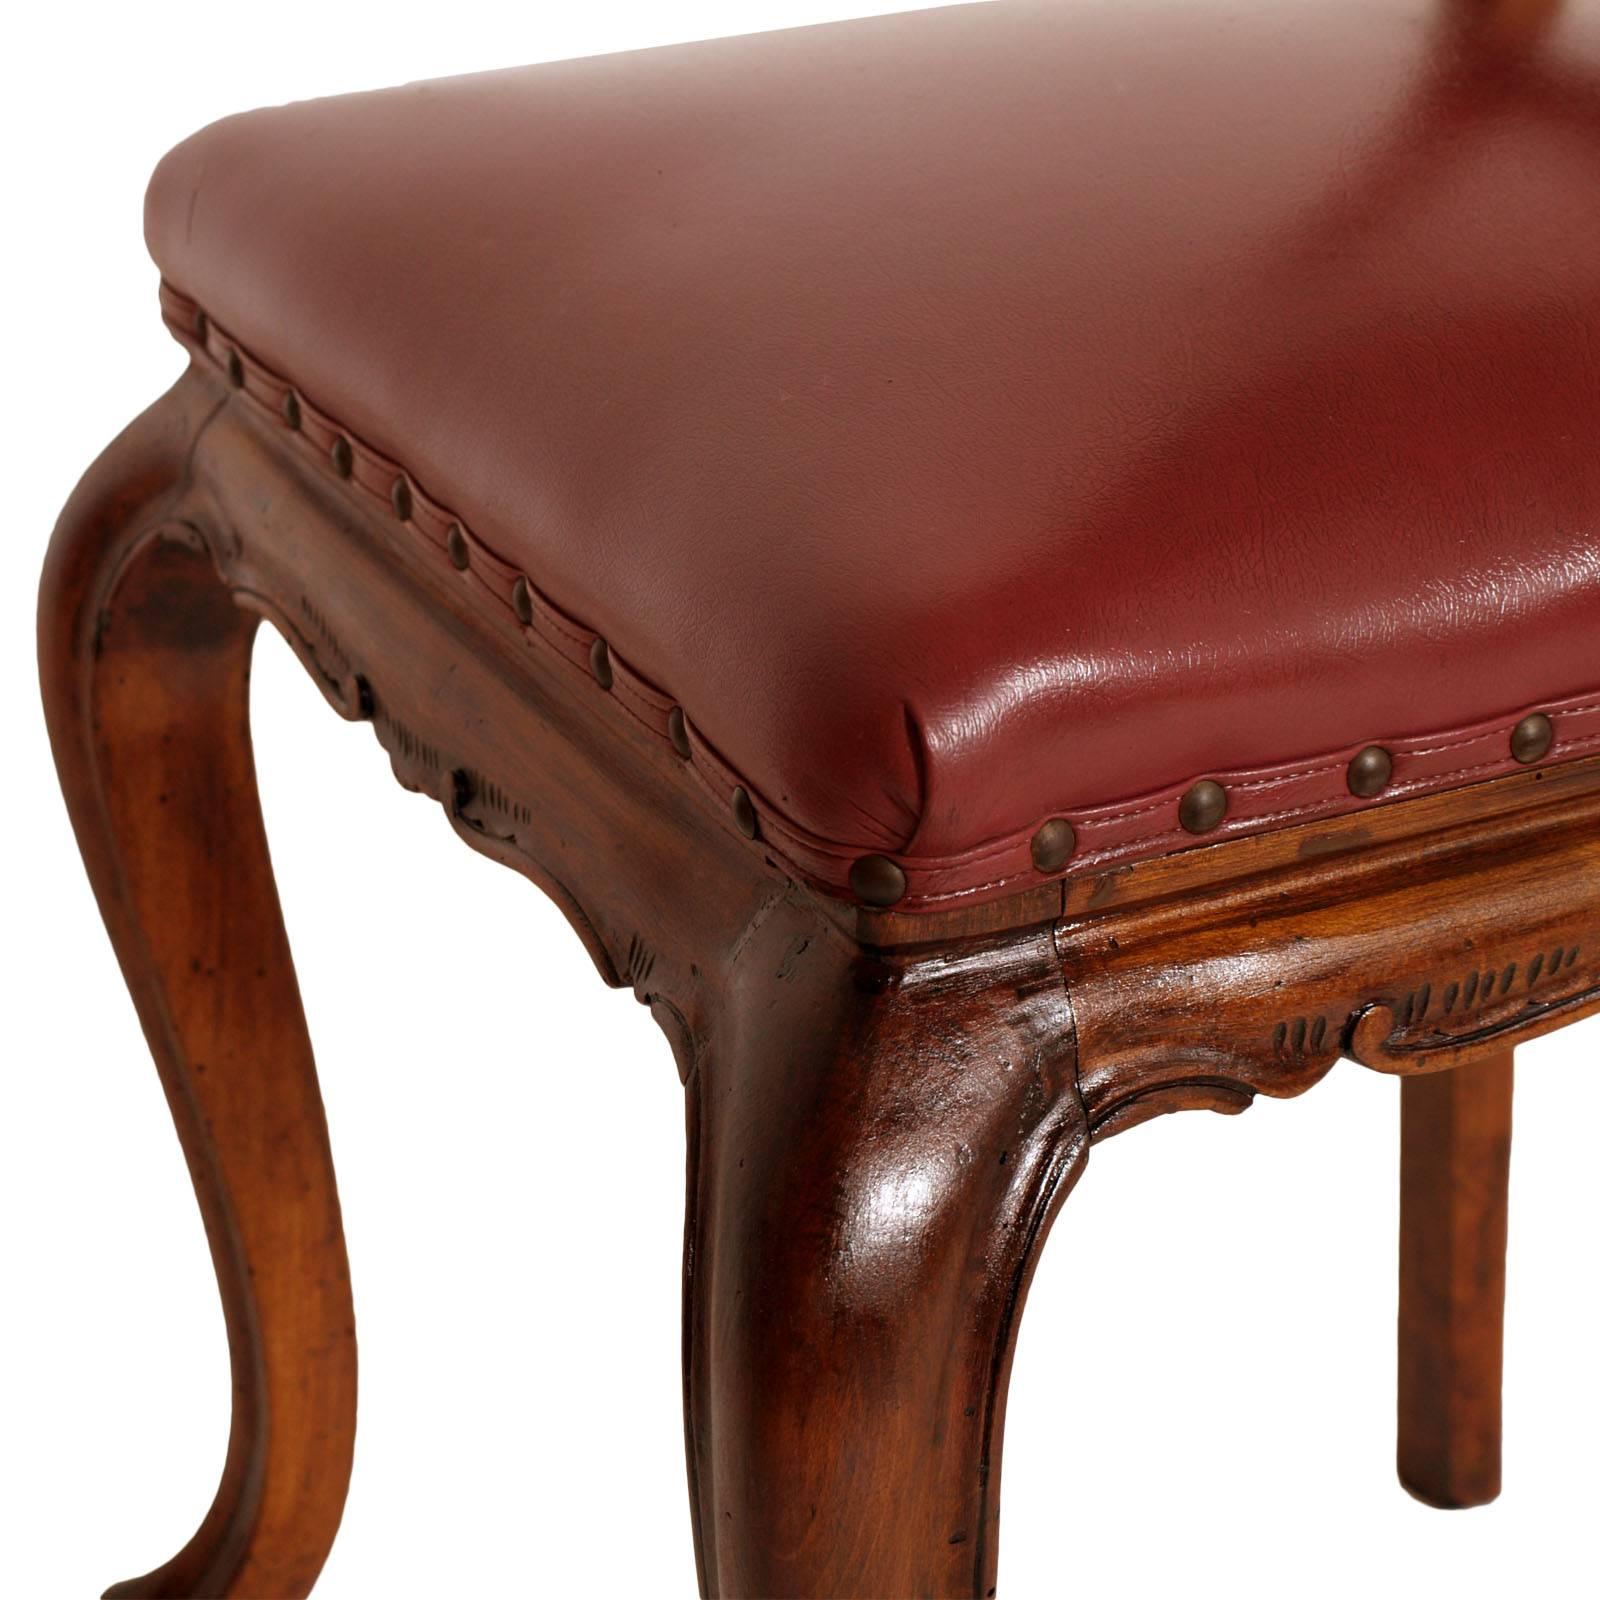 Pair Art Nouveau Neoclassical Chairs , Hand-Carved Walnut, Spring Leather Seat For Sale 2